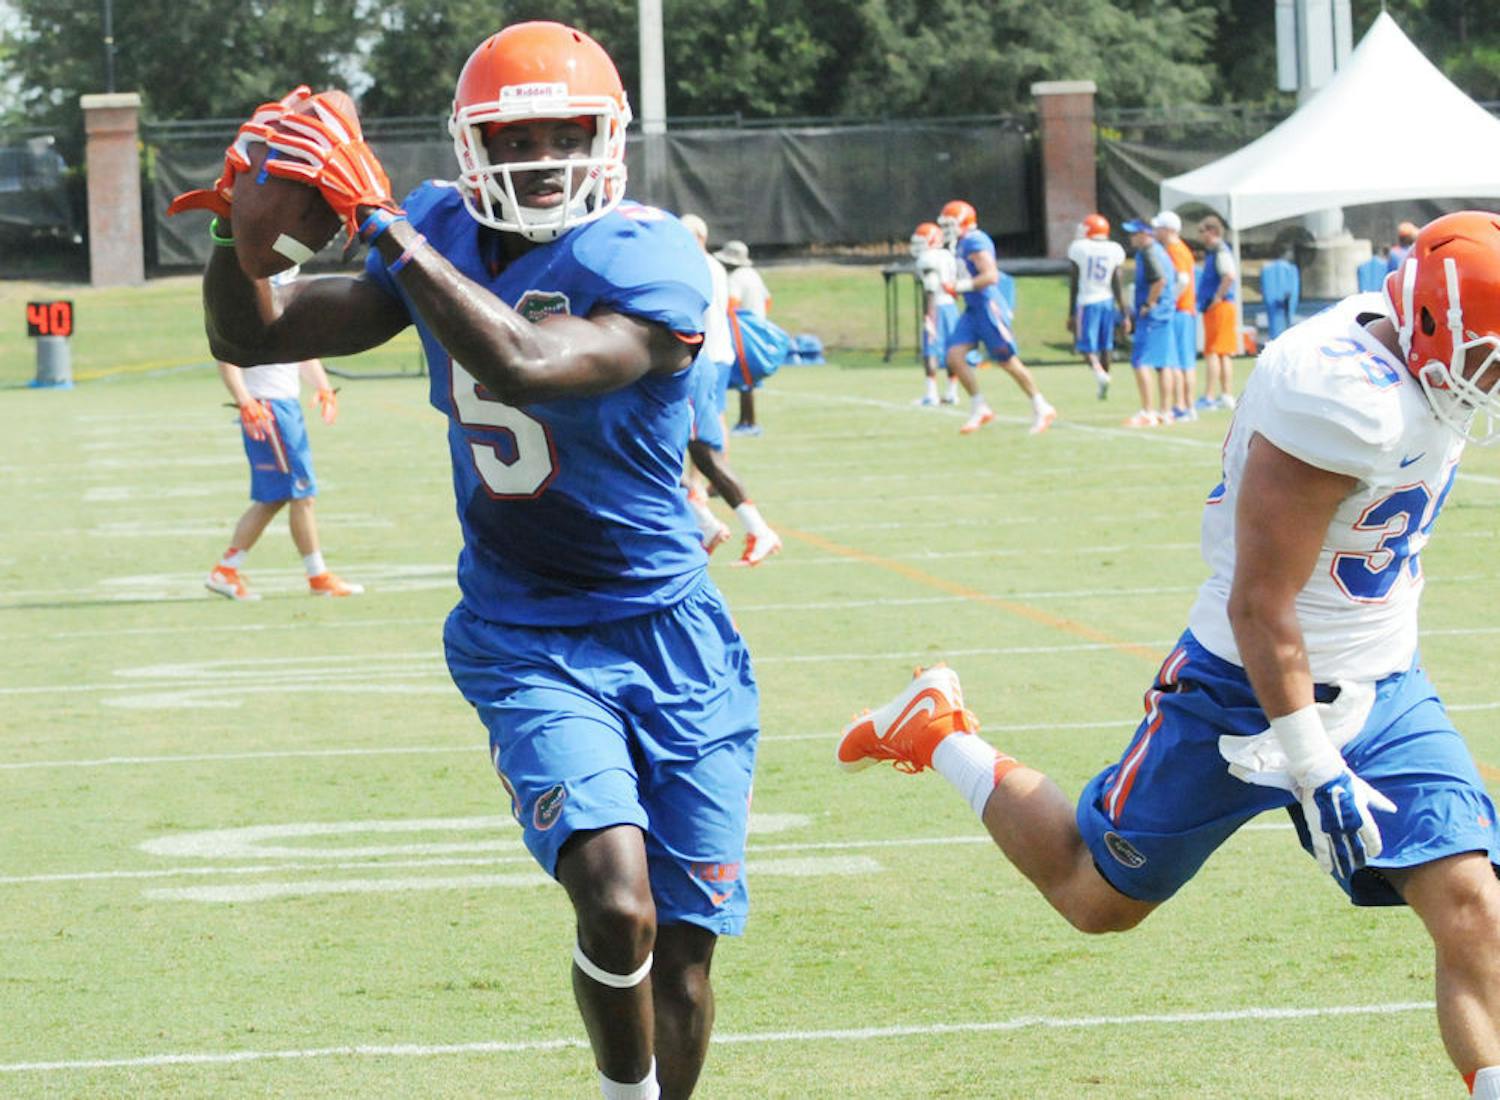 UF wide receiver Ahmad Fulwood catches a pass from quarterback Will Grier (not pictured) during practice Aug. 8, 2015, at Donald R. Dizney Stadium.